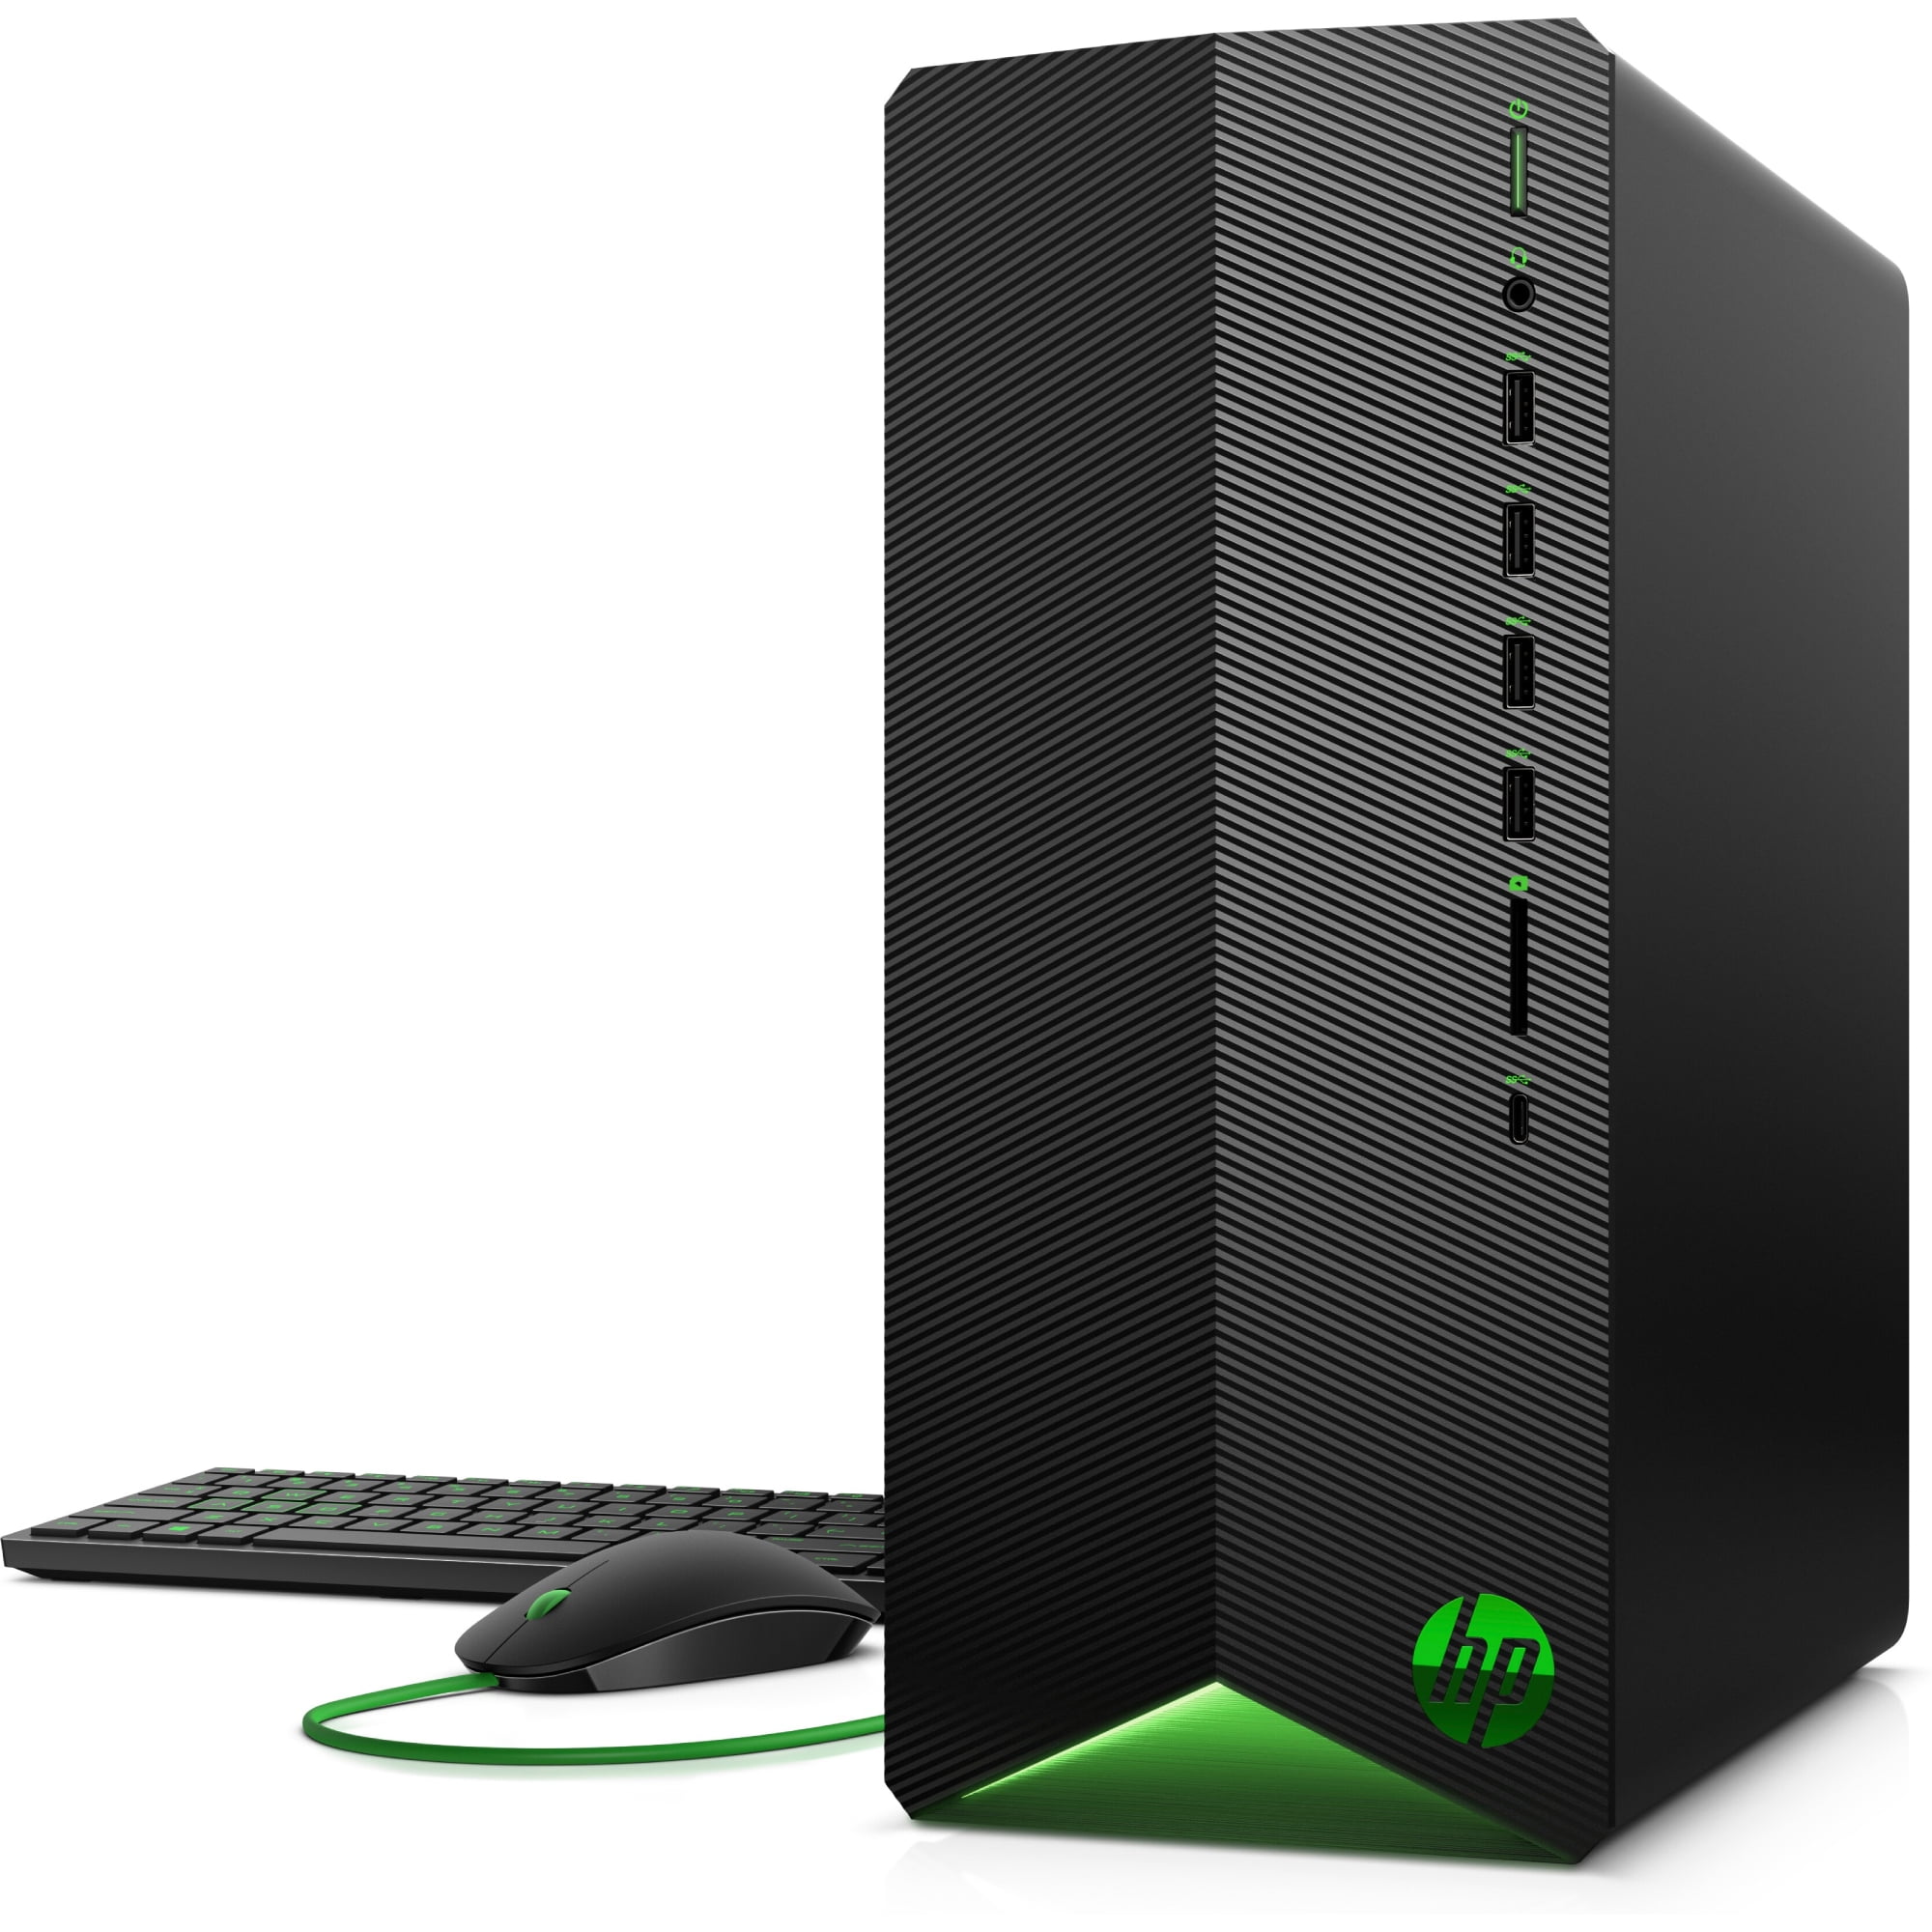 HP Pavilion Gaming Desktop, Intel Core i5-10400F, 8GB(DDR4,1 DIMM), 256GB  NVME SSD M.2, Windows 10, HP Wired KB/Mouse, 3-in-1,NVIDIA GeForce GTX 1650  